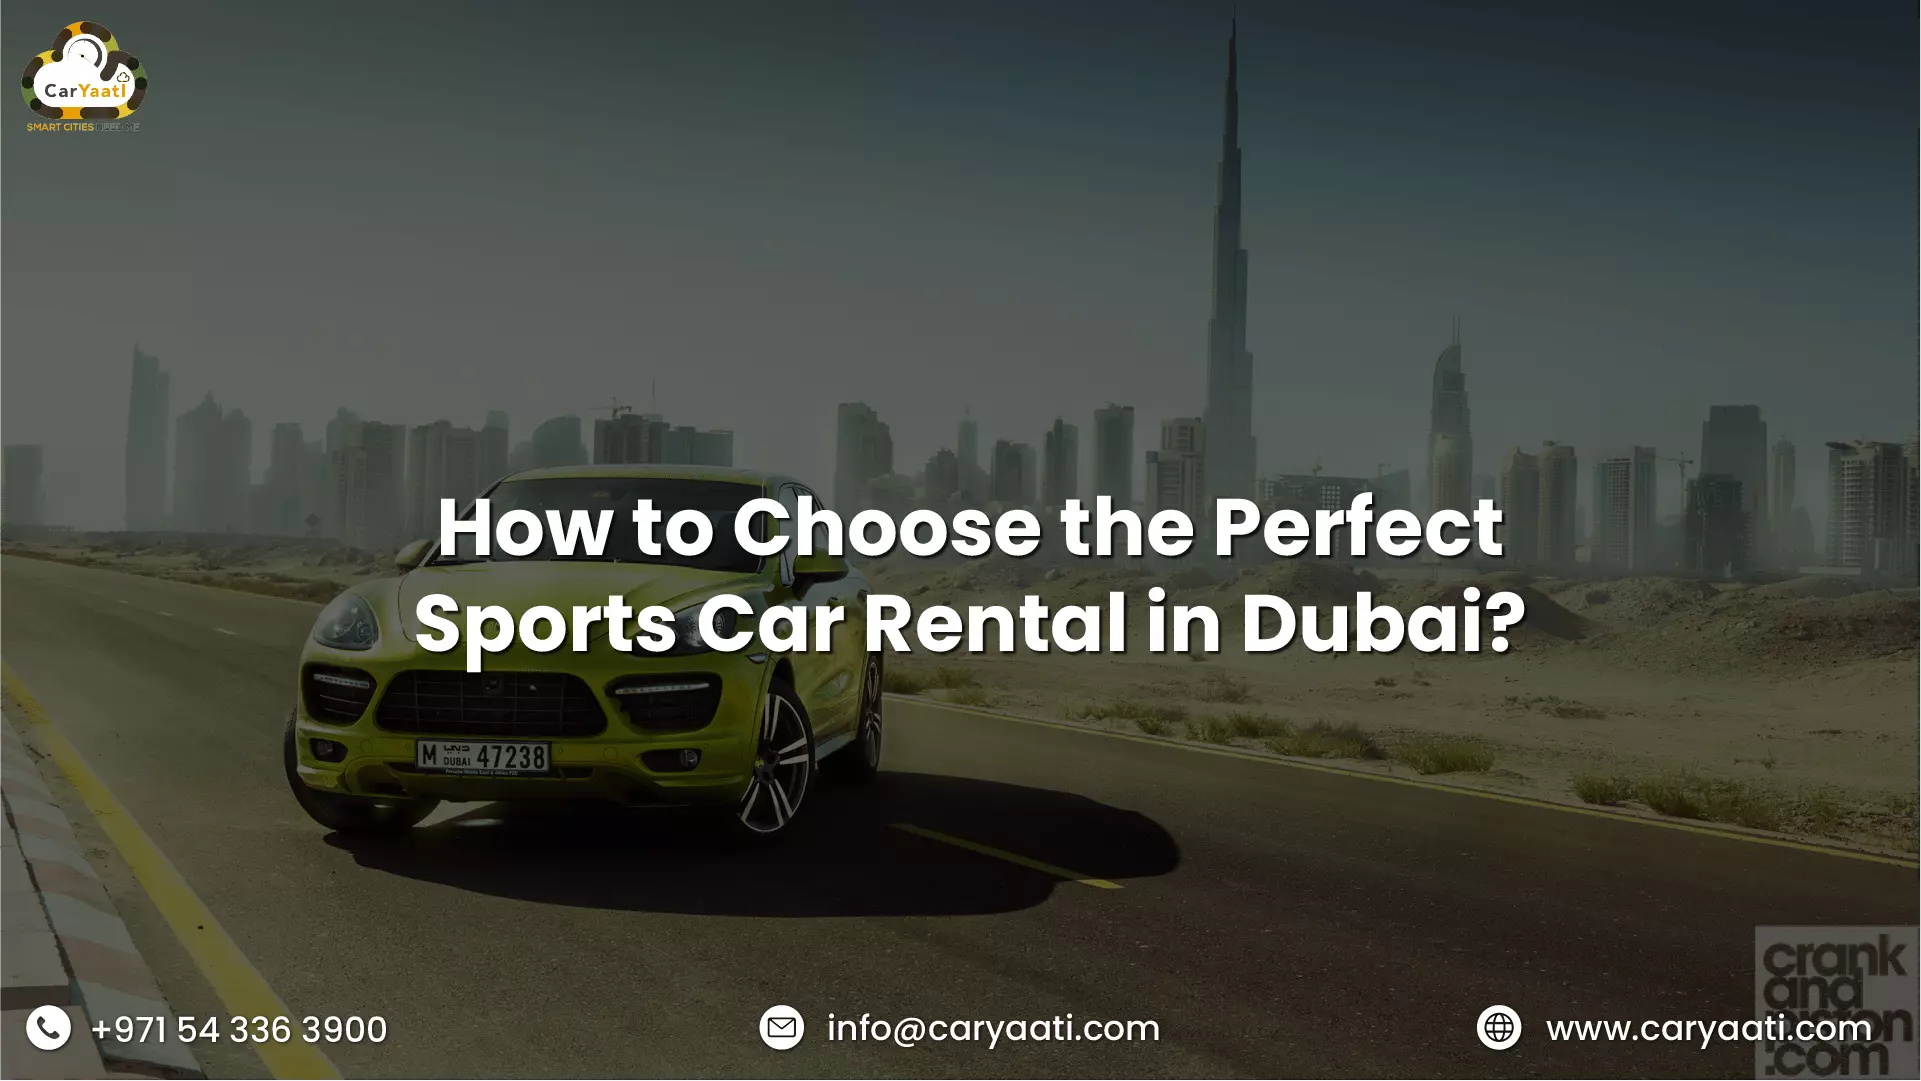 How to Choose the Perfect Sports Car Rental in Dubai?